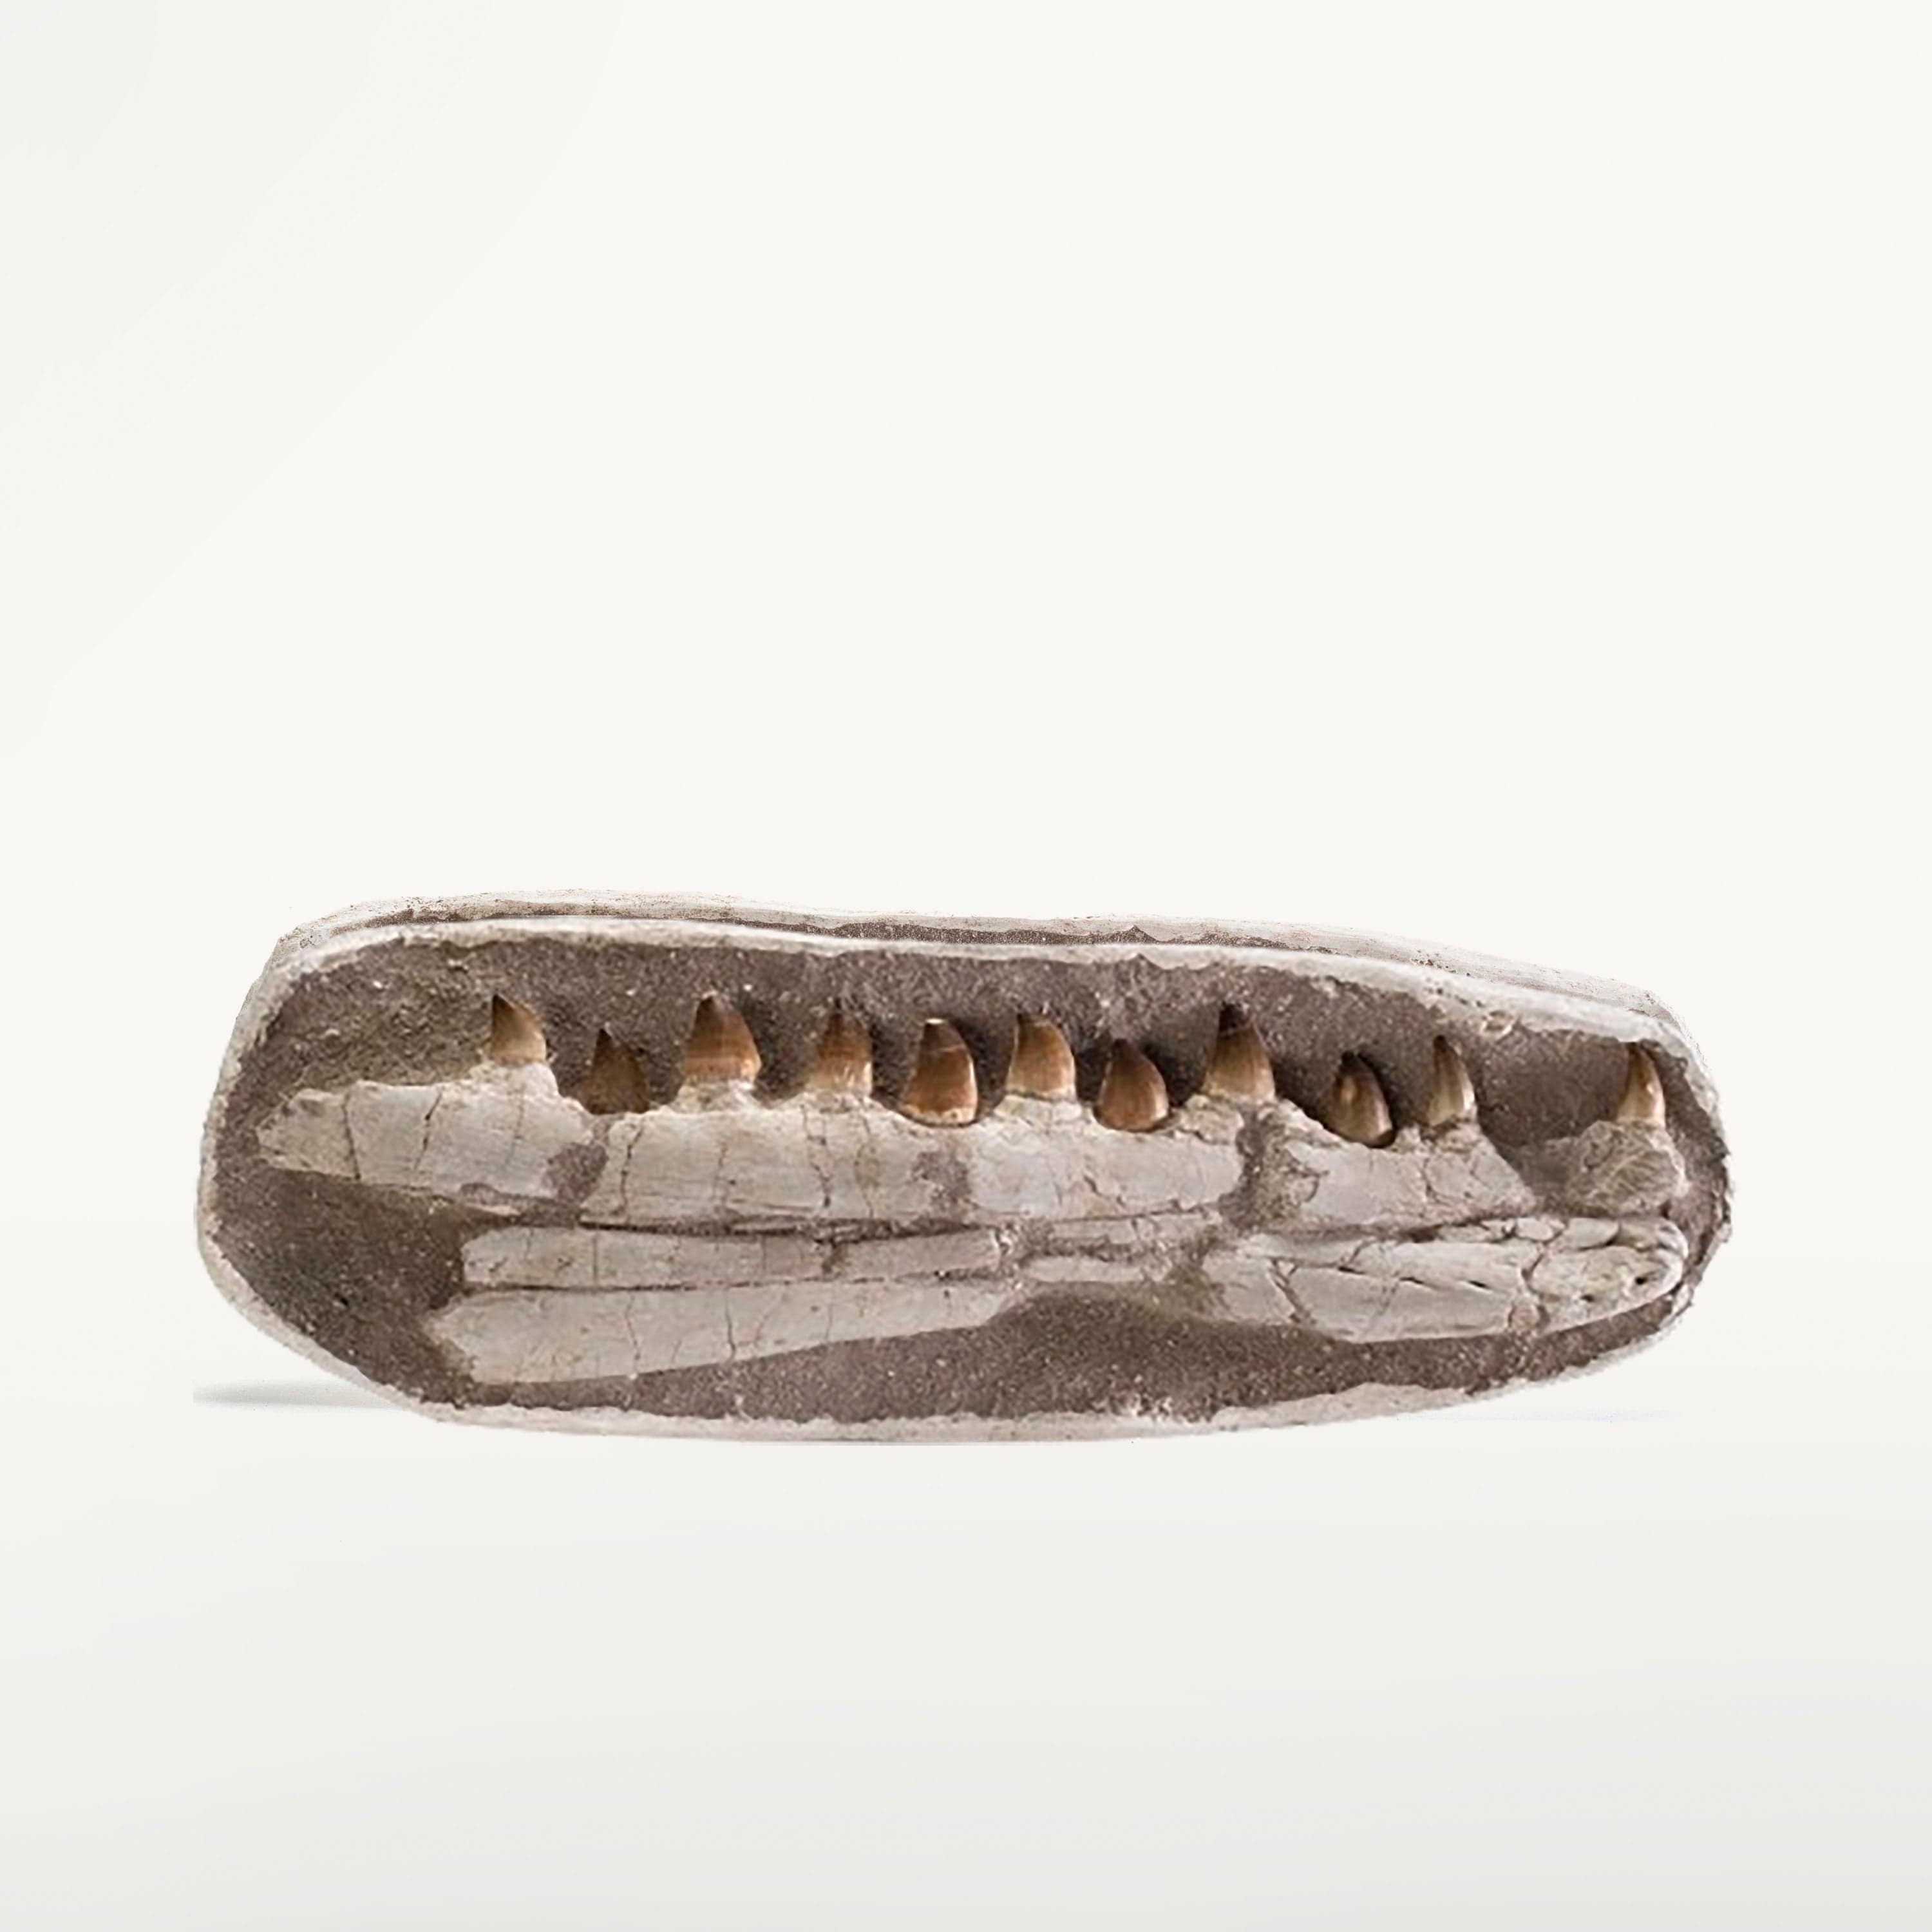 Kalifano Mosasaurus Fossils Morocco Mosasaurus Jaw and Teeth Fossil  - 24 in MOST6000.002